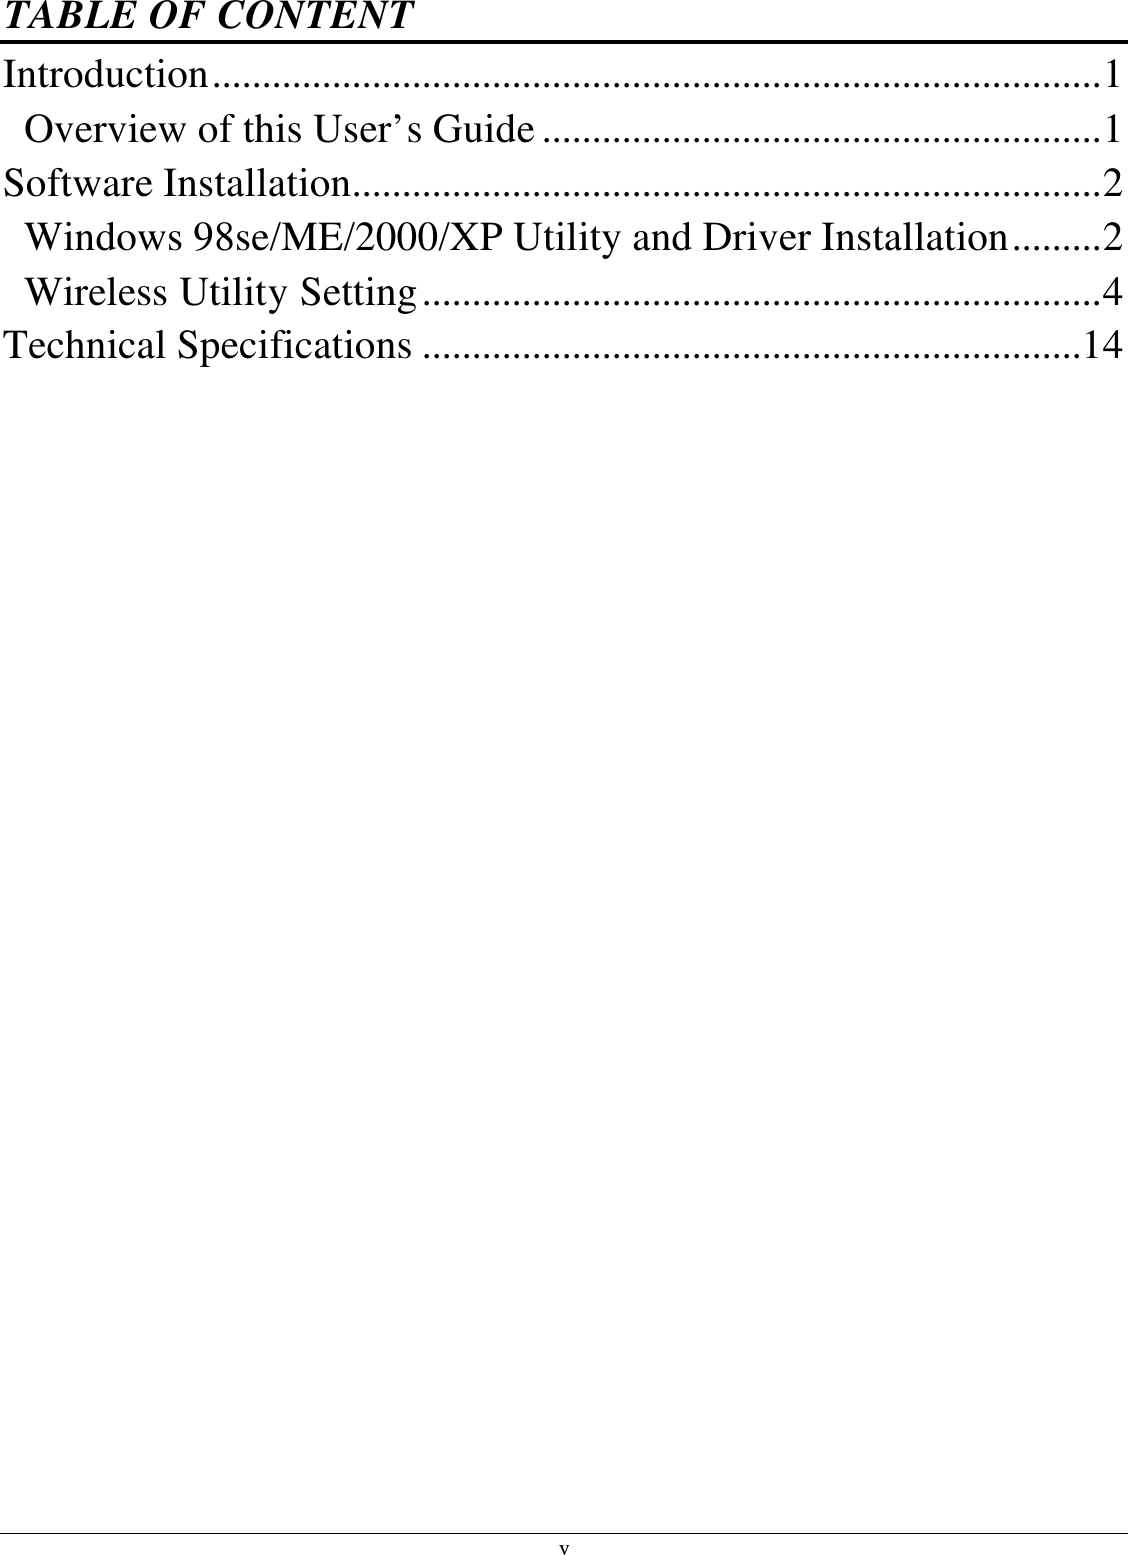 v TABLE OF CONTENT Introduction.........................................................................................1 Overview of this User’s Guide ........................................................1 Software Installation...........................................................................2 Windows 98se/ME/2000/XP Utility and Driver Installation.........2 Wireless Utility Setting....................................................................4 Technical Specifications ..................................................................14  